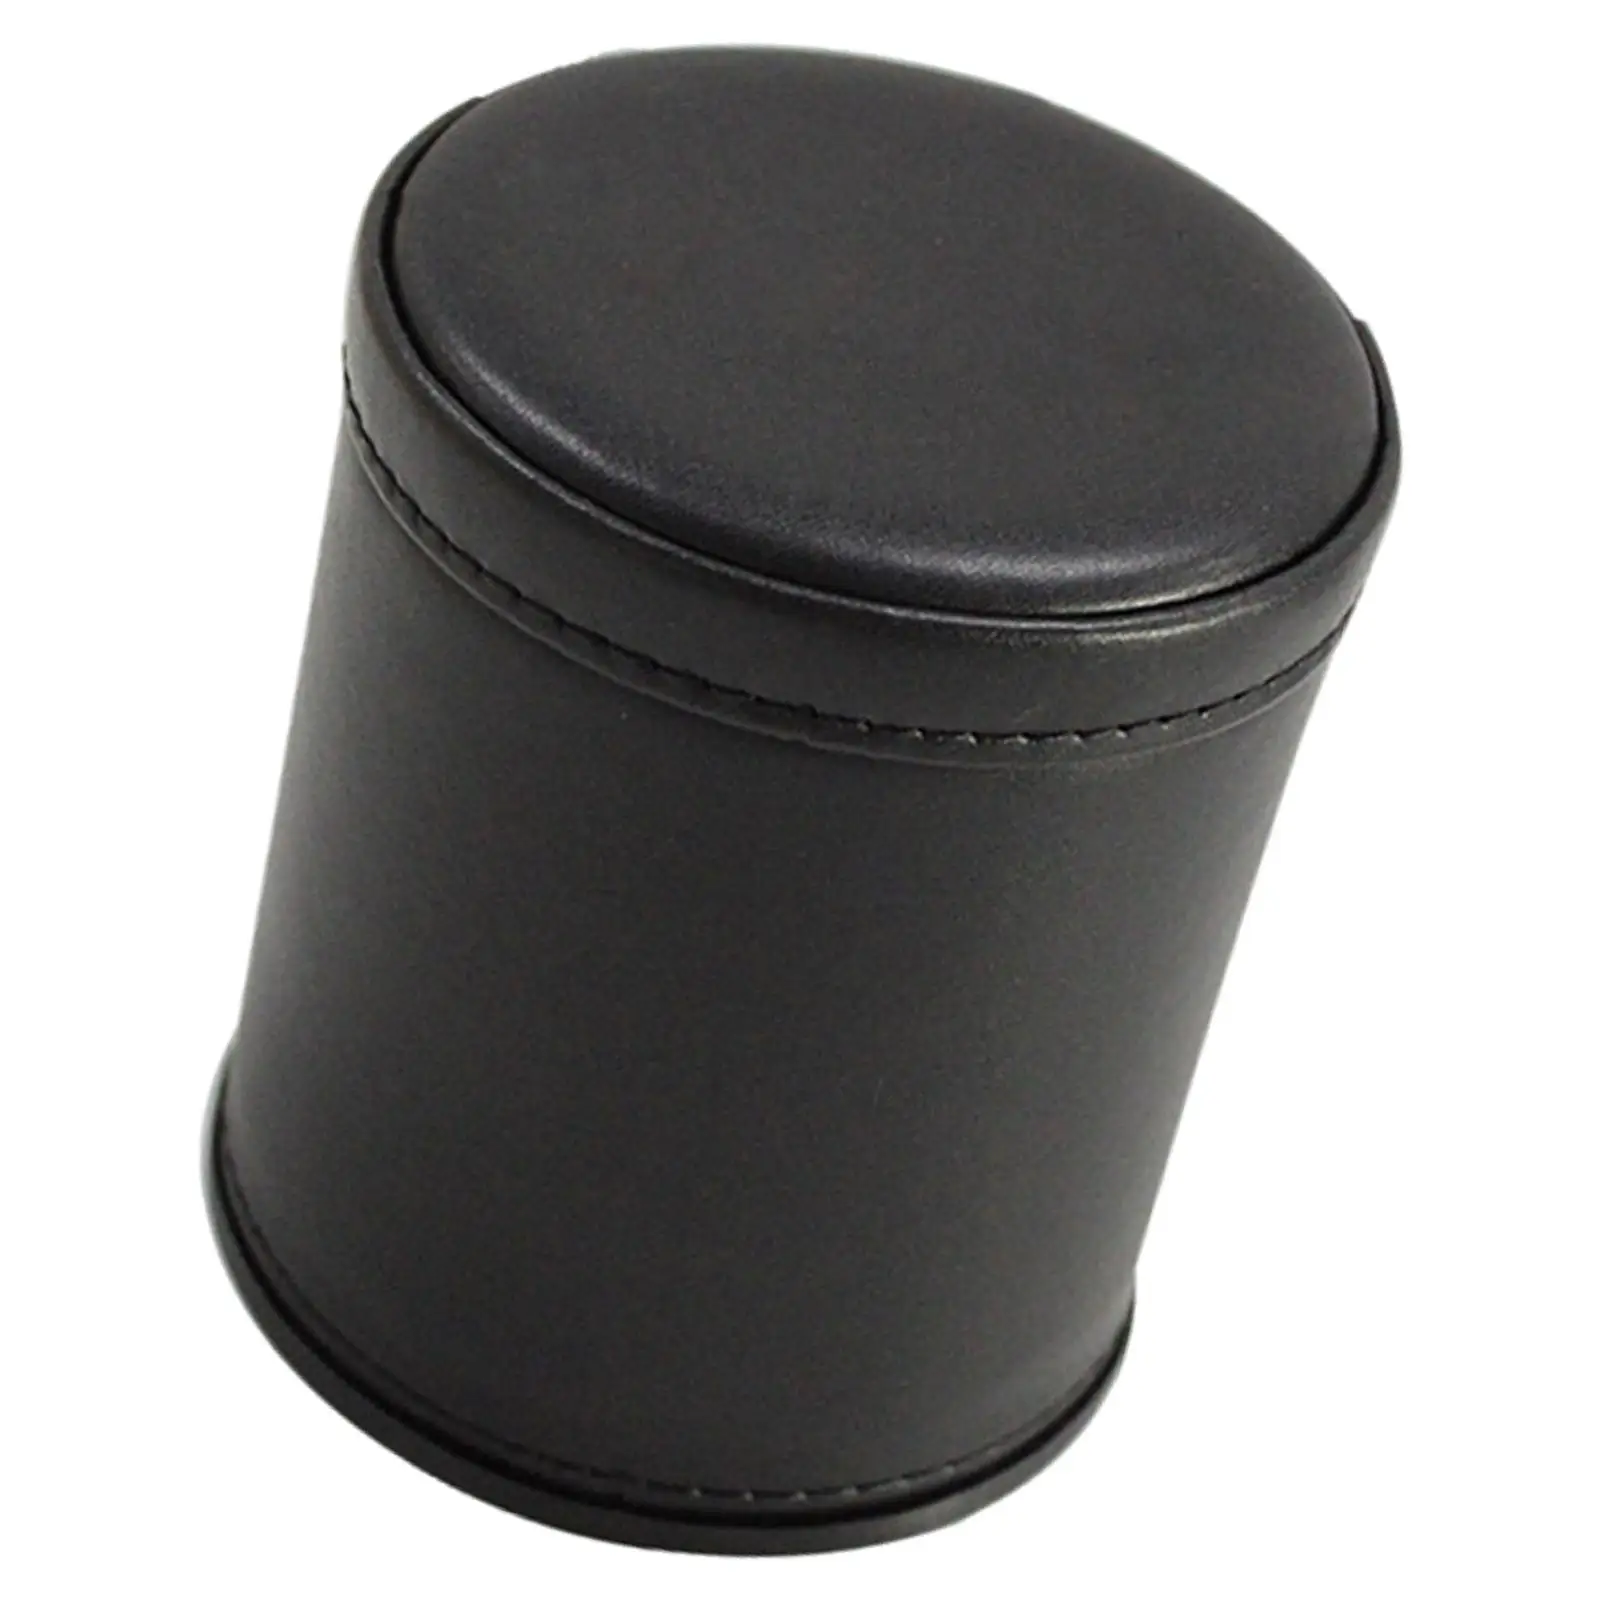 Manual Dice Cup Entertainment Dice Game Accessories Dice Shaker for Club Party Family Home